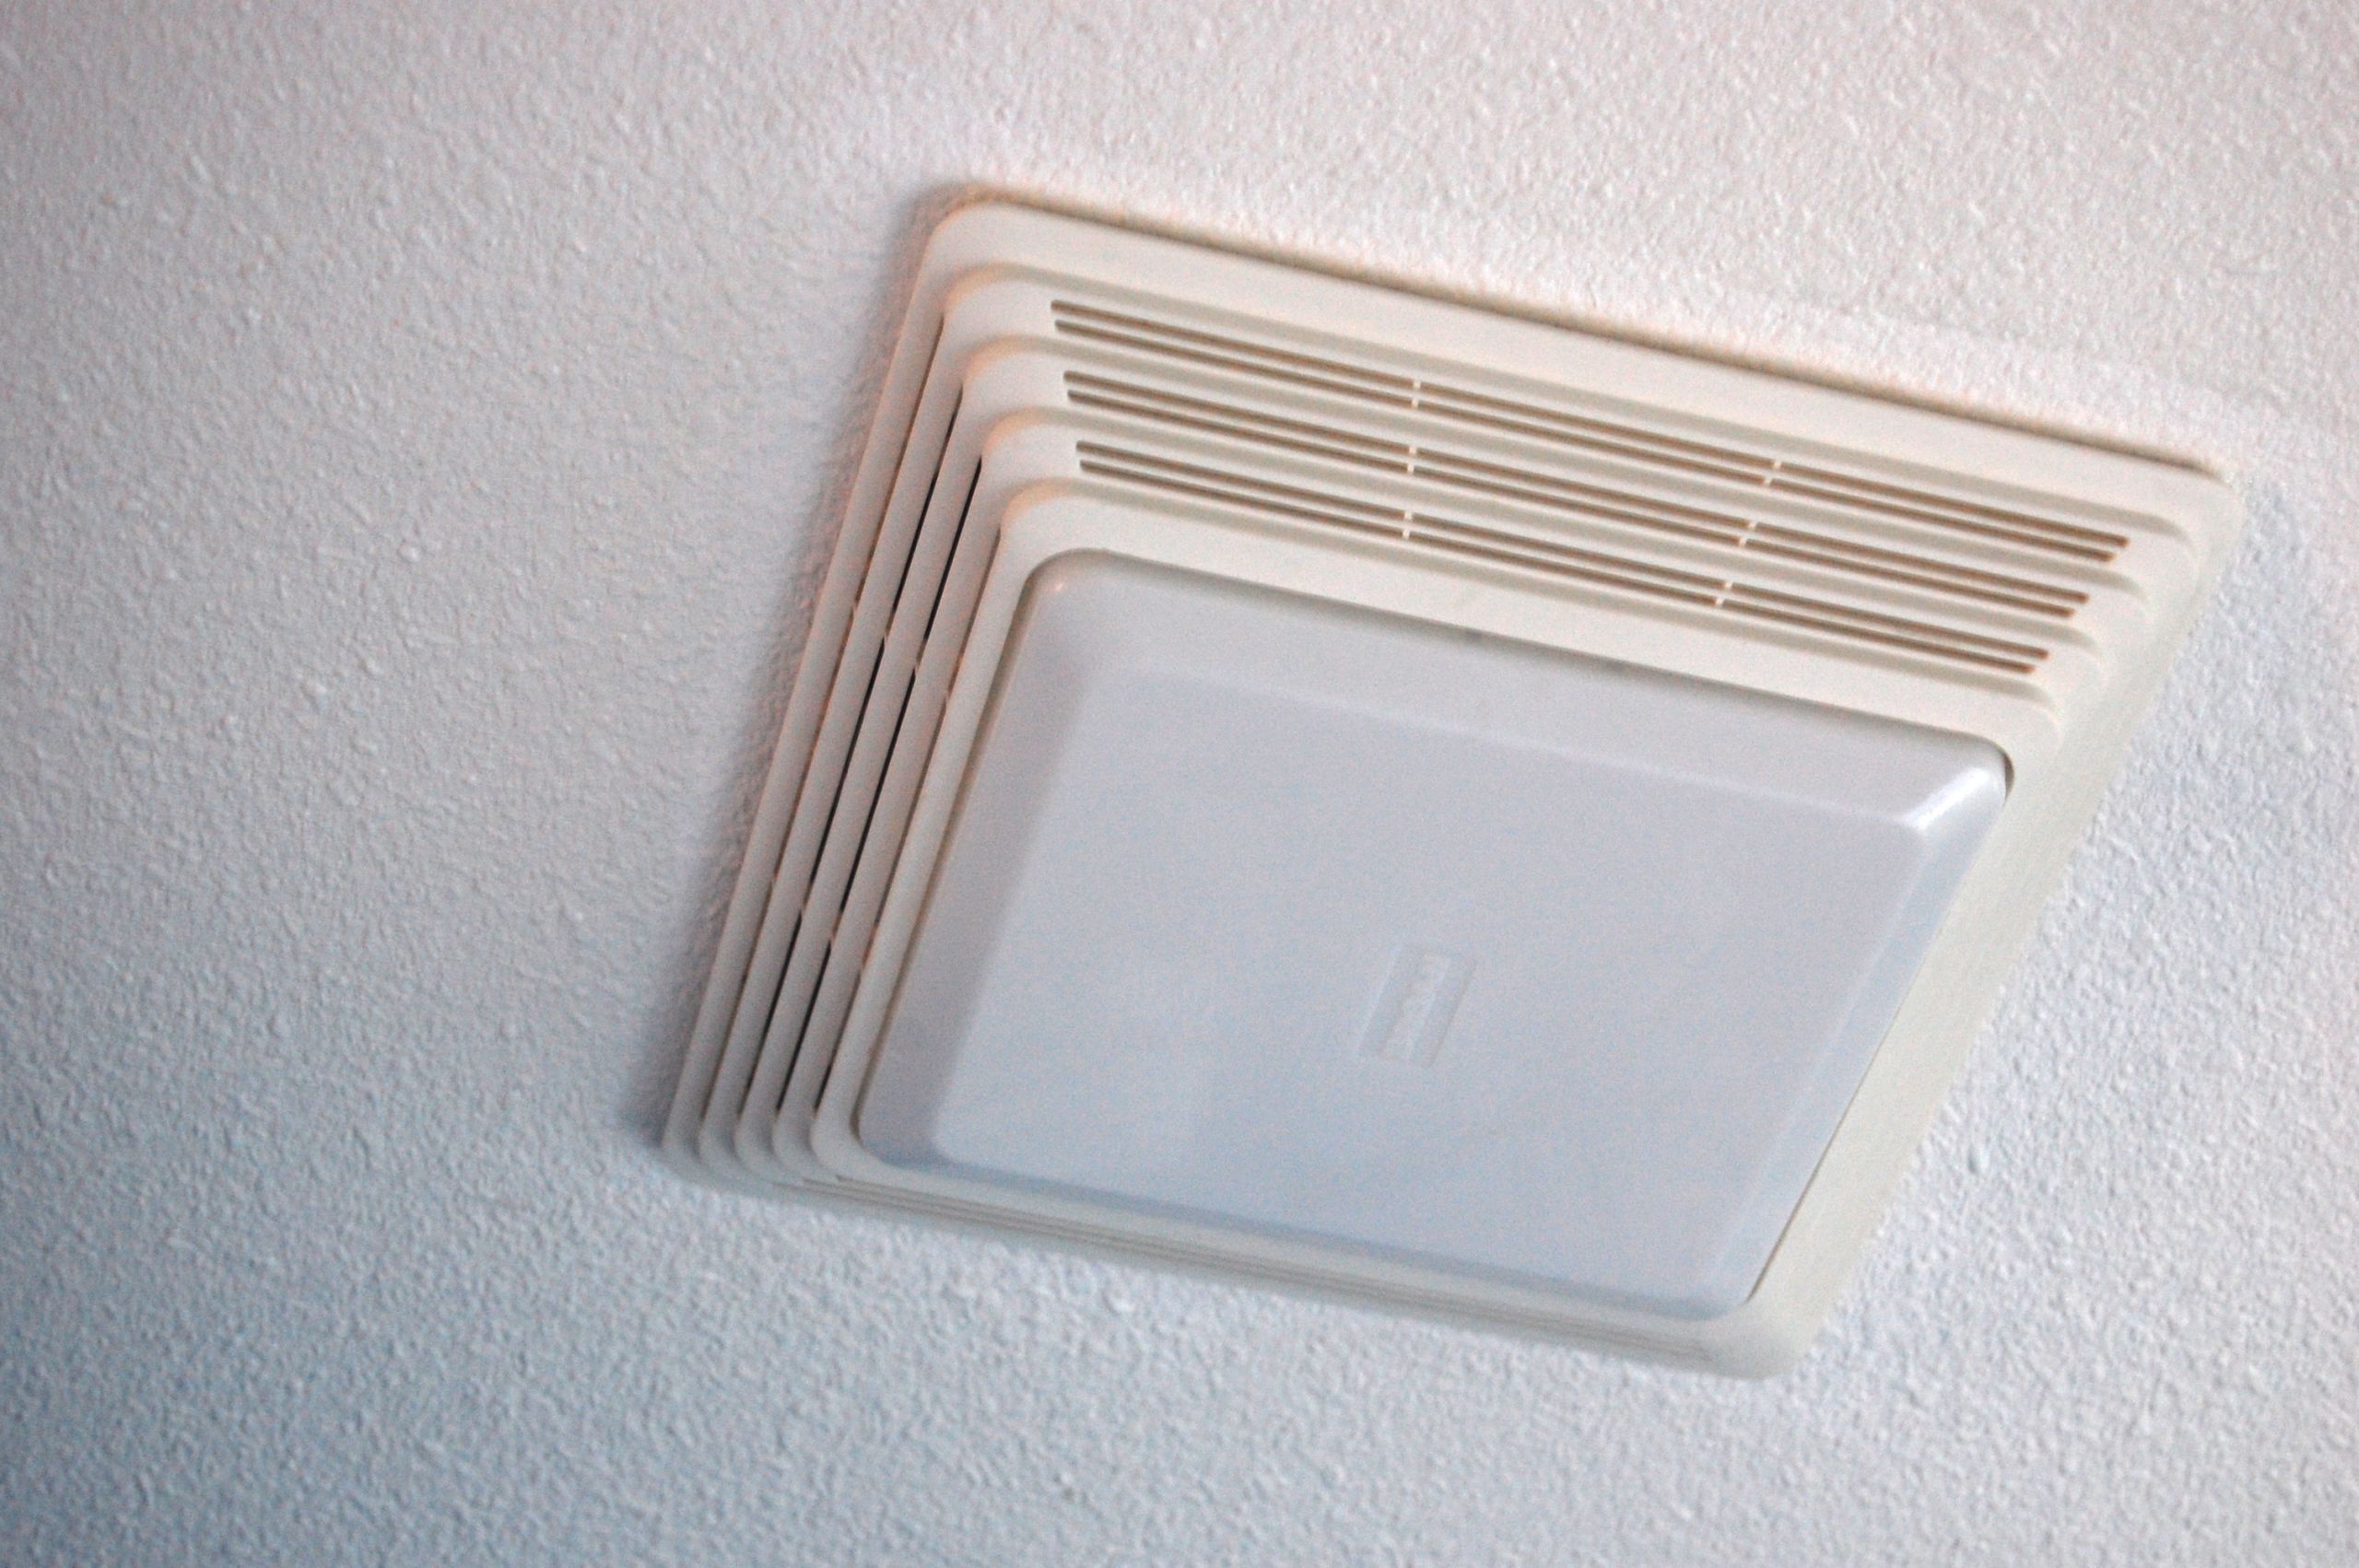 Bathroom Exhaust Fan Cover
 Cleaning your bathroom fan with a light